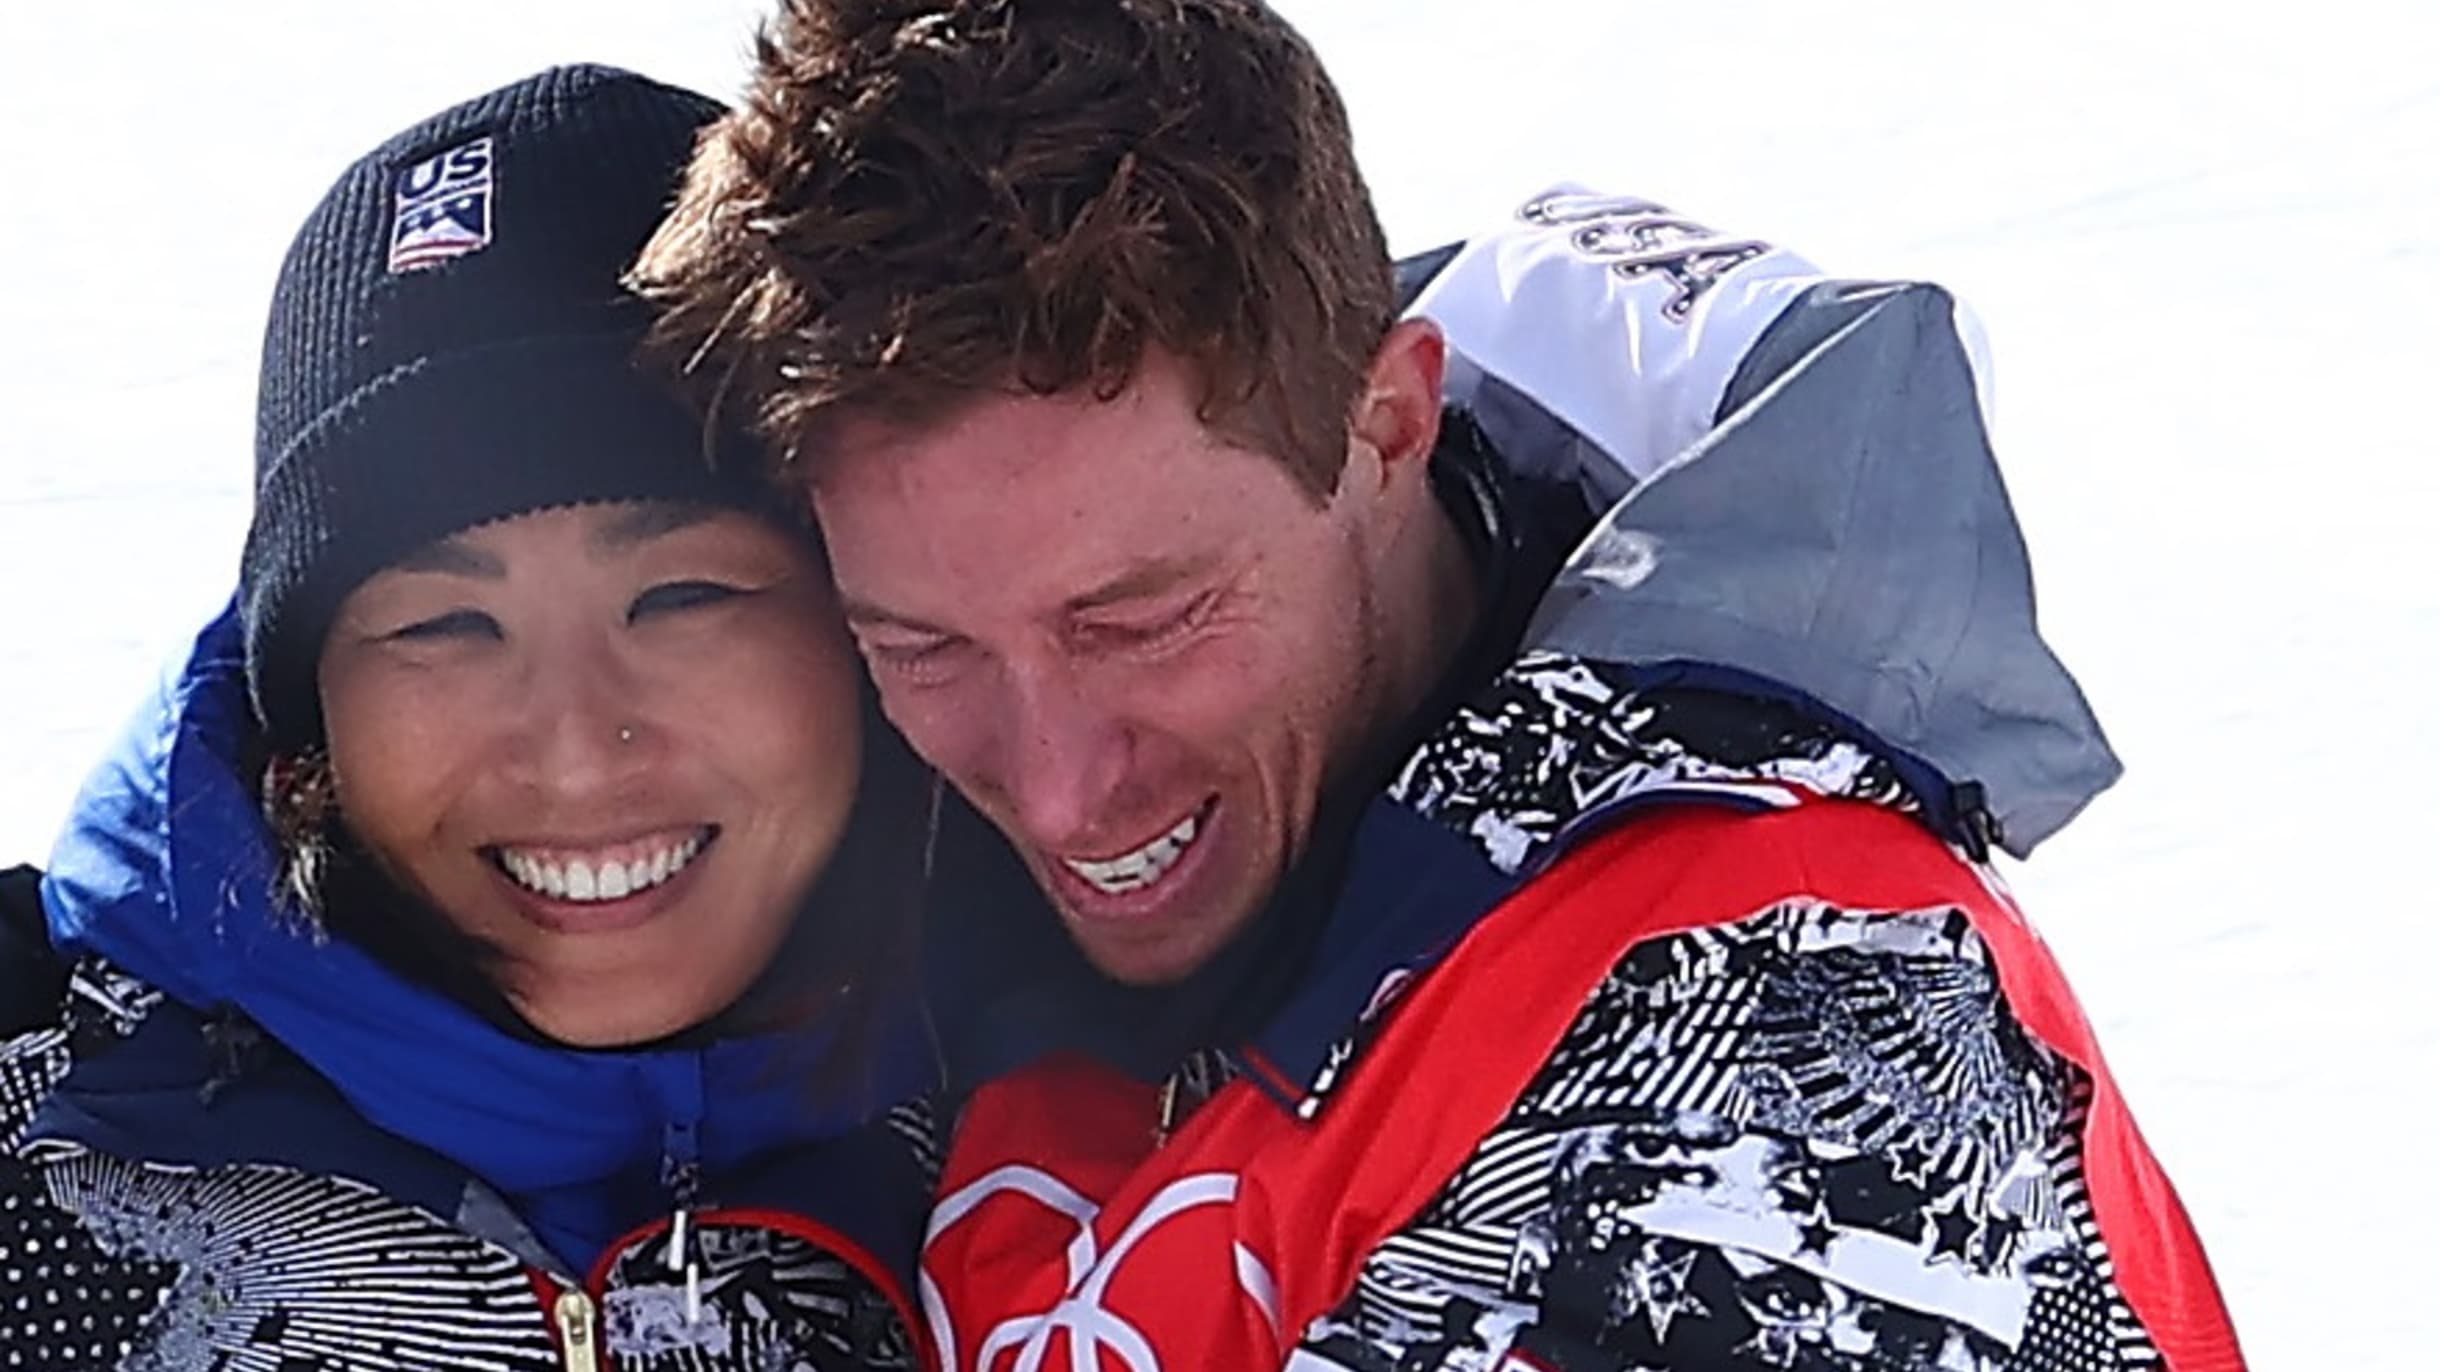 Shaun White retires from Olympic competition: 'This has been the